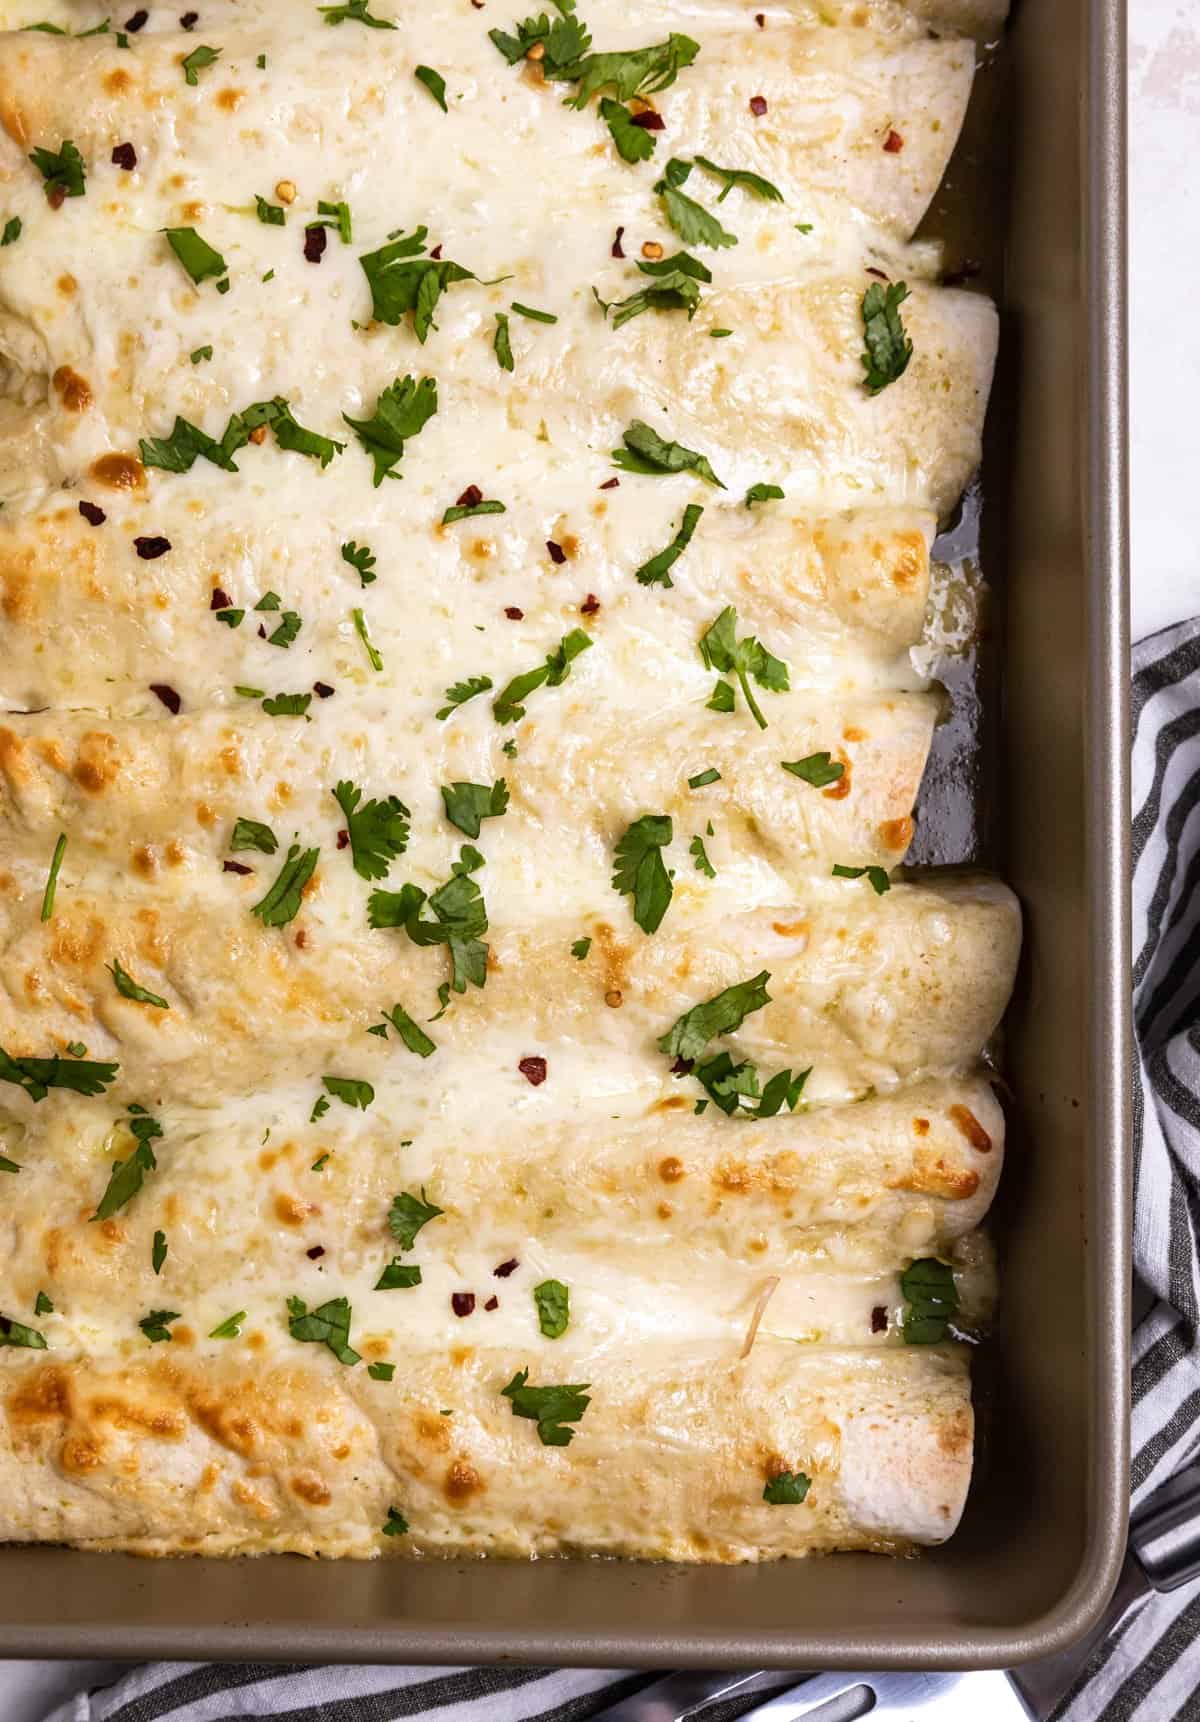 Baked green chicken enchiladas with chopped cilantro on top in baking pan.